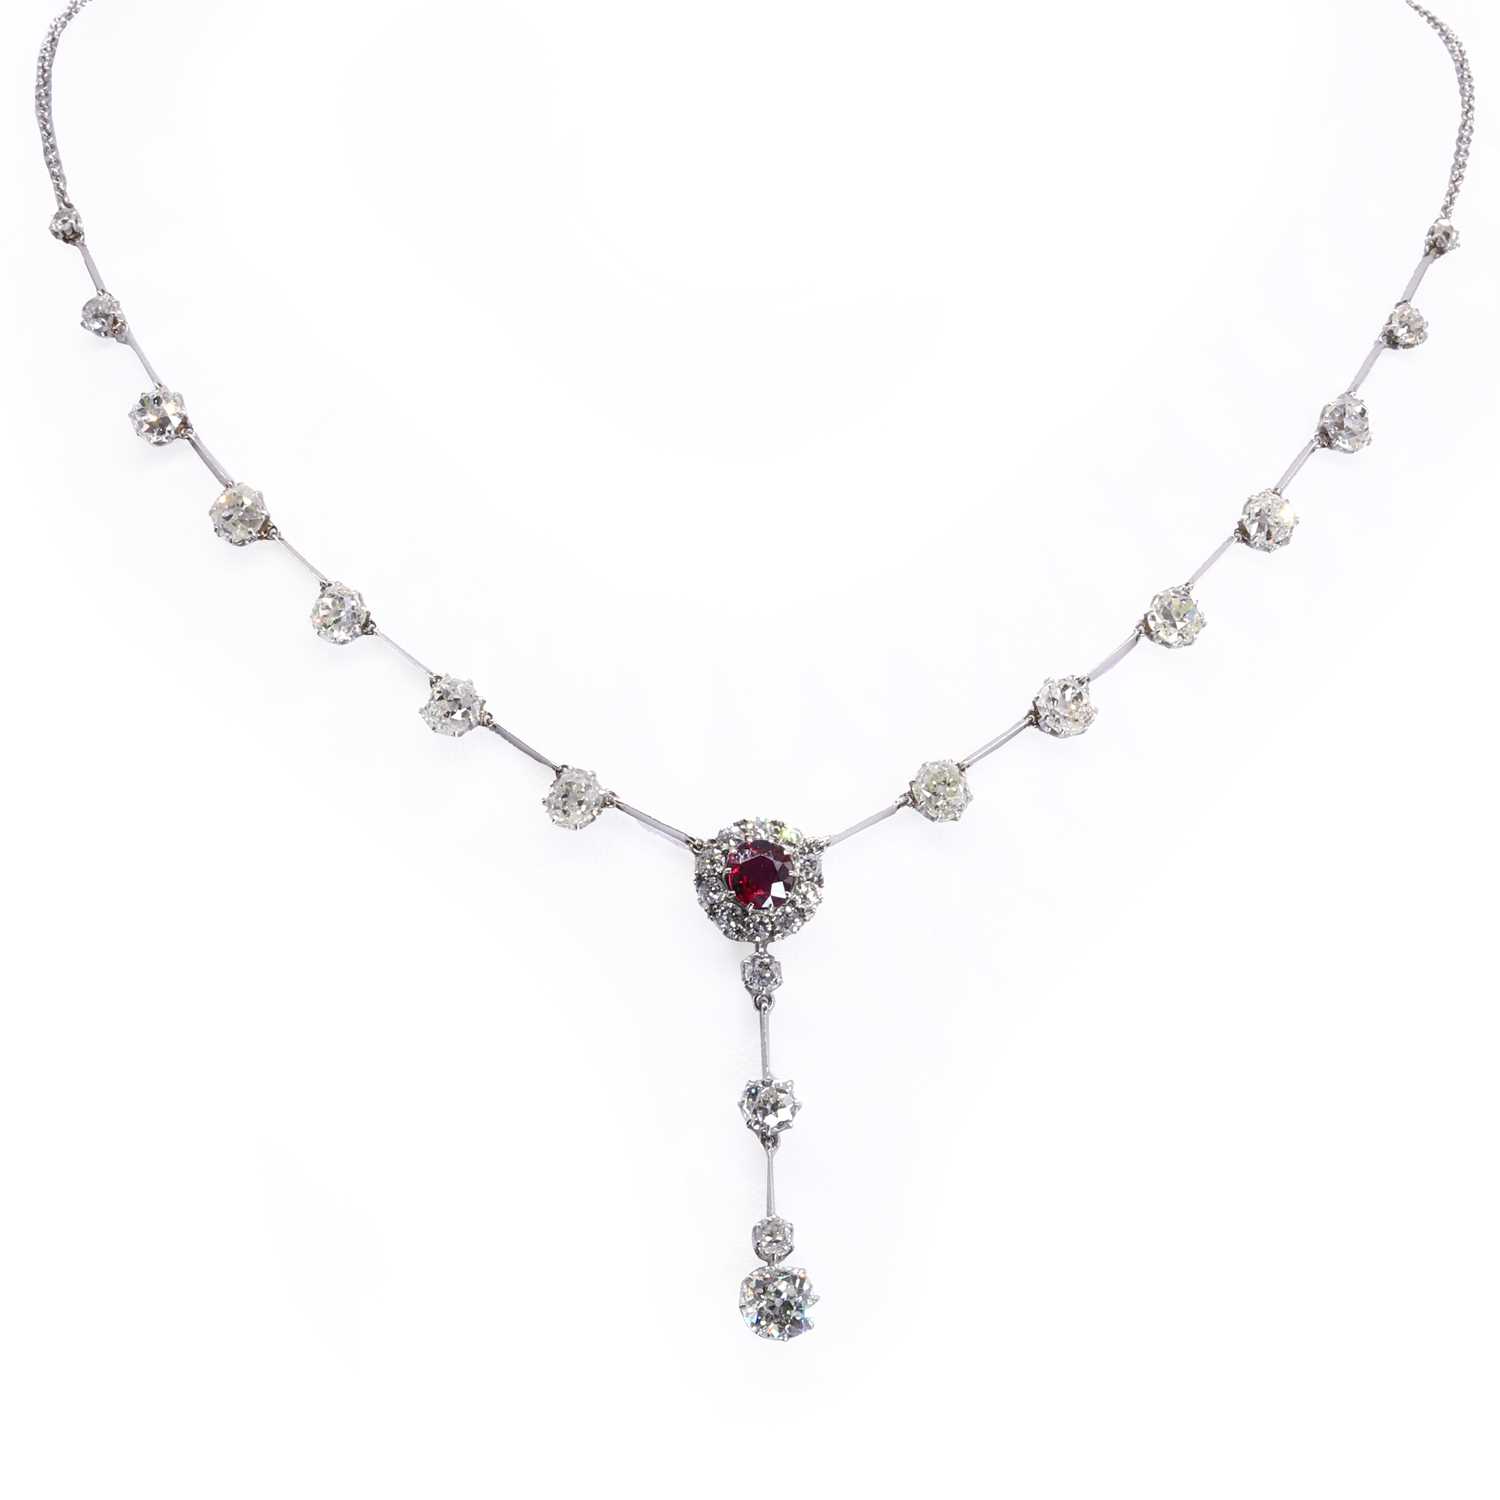 A diamond and ruby necklace, c.1915,